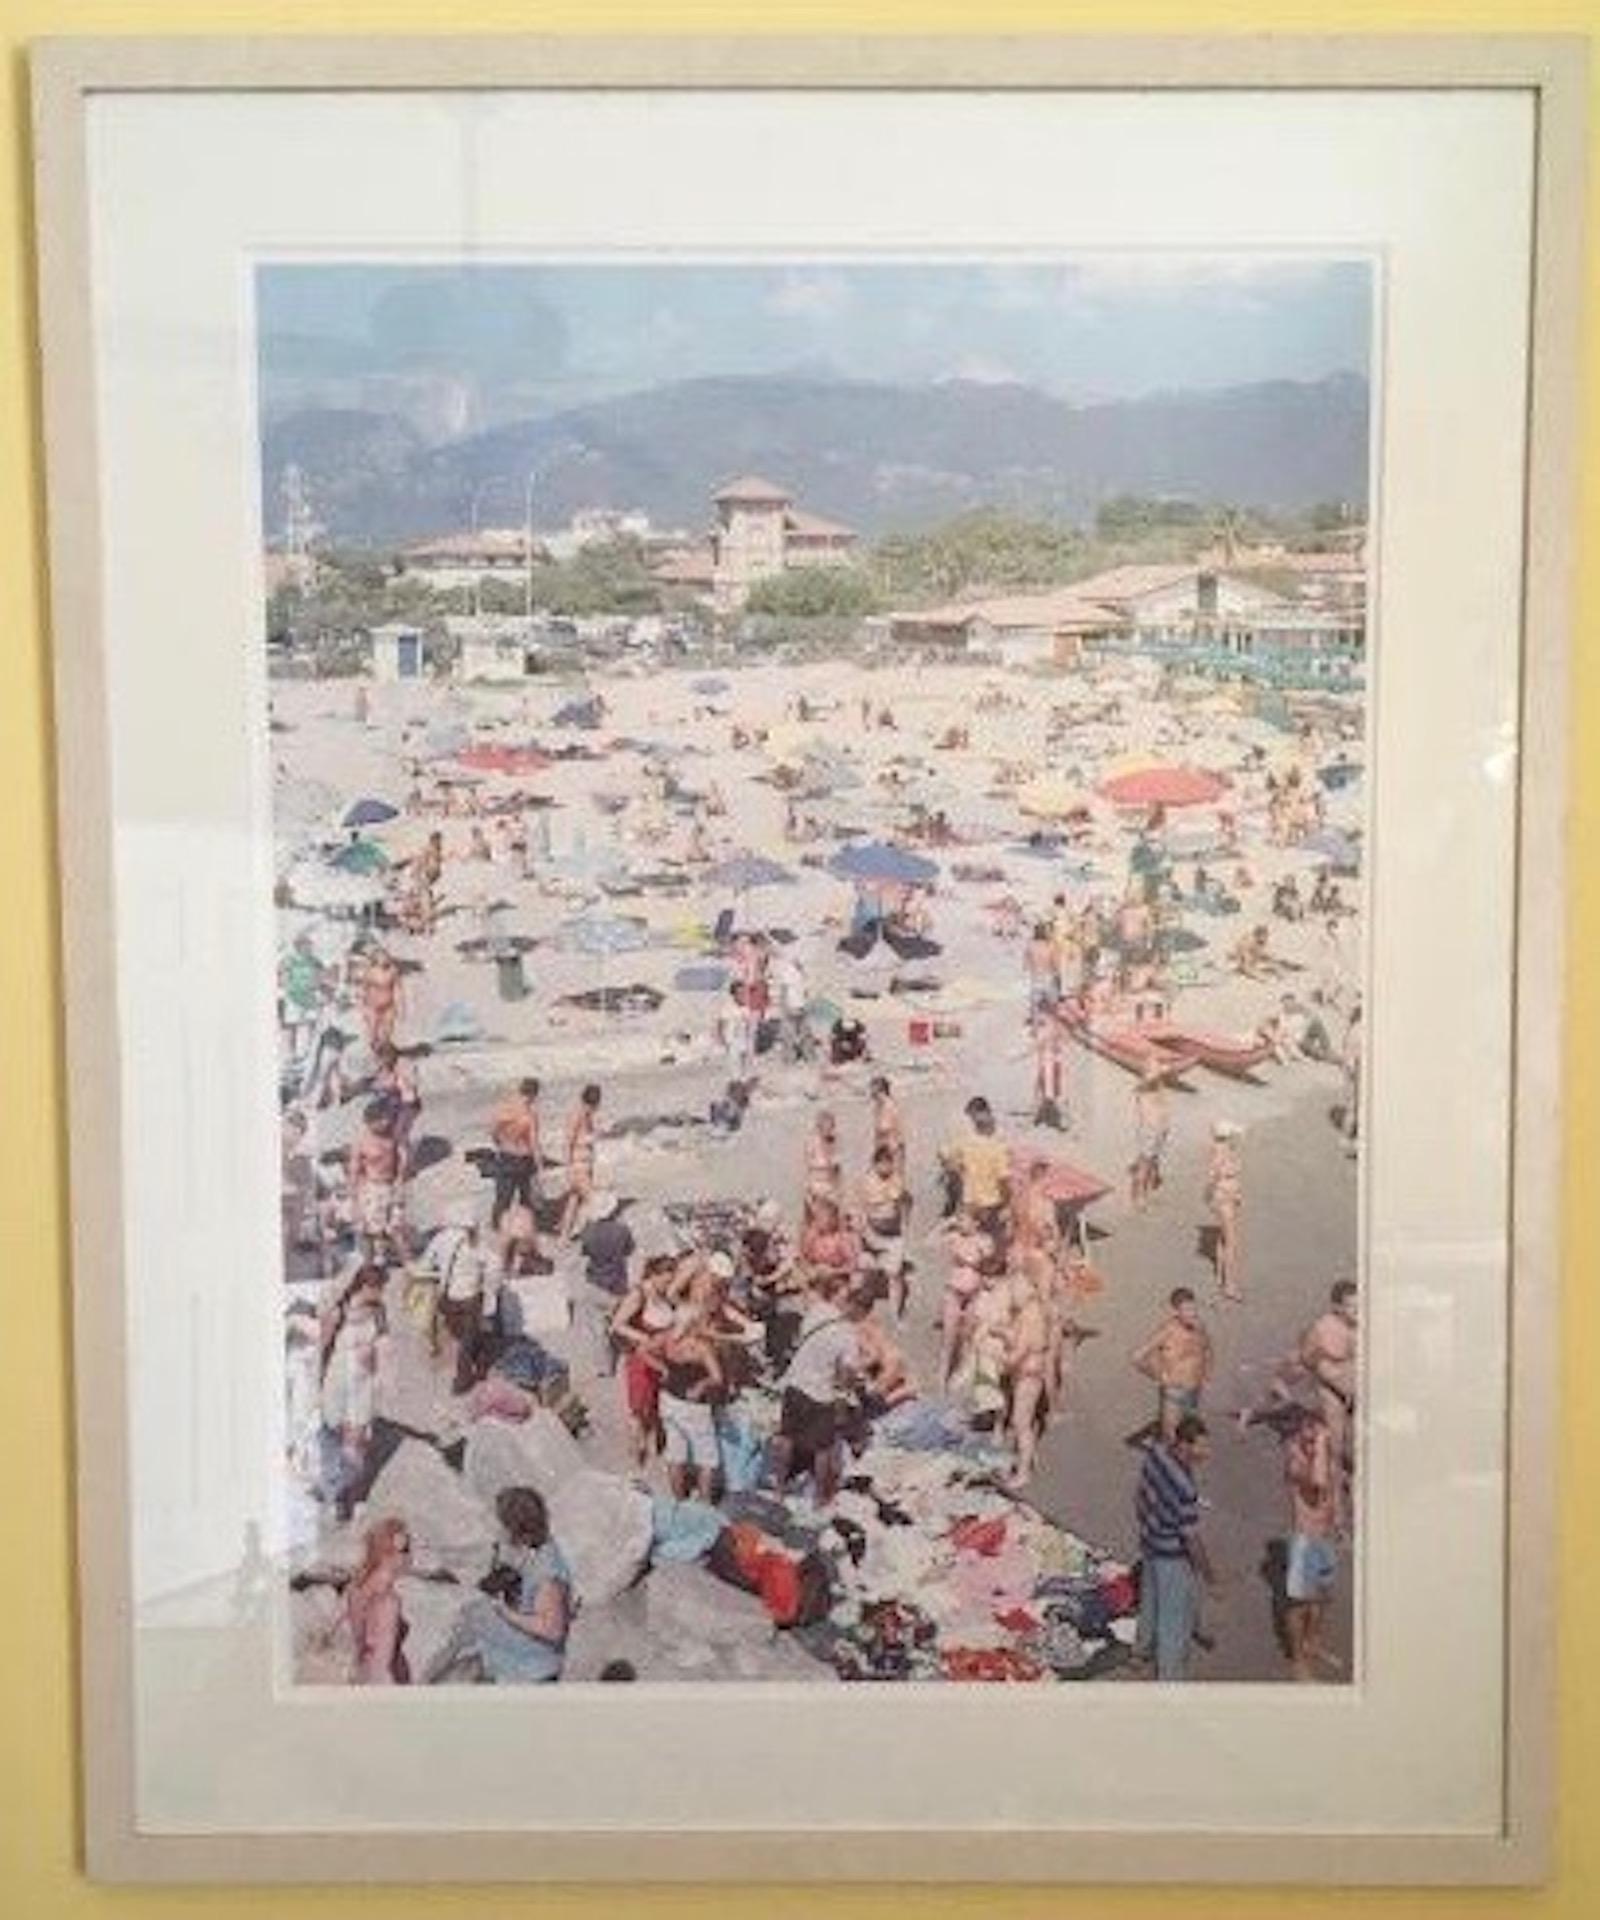 Massimo Vitali (Italy, 1944) MadiMa Ragnodoro, Italy Lithograph, circa 1990

Limited edition lithograph. Edition sizes 120.

A Summer day at the beach in Italy photograph by listed photographer Massimo Vitali.

Dimensions 26.5